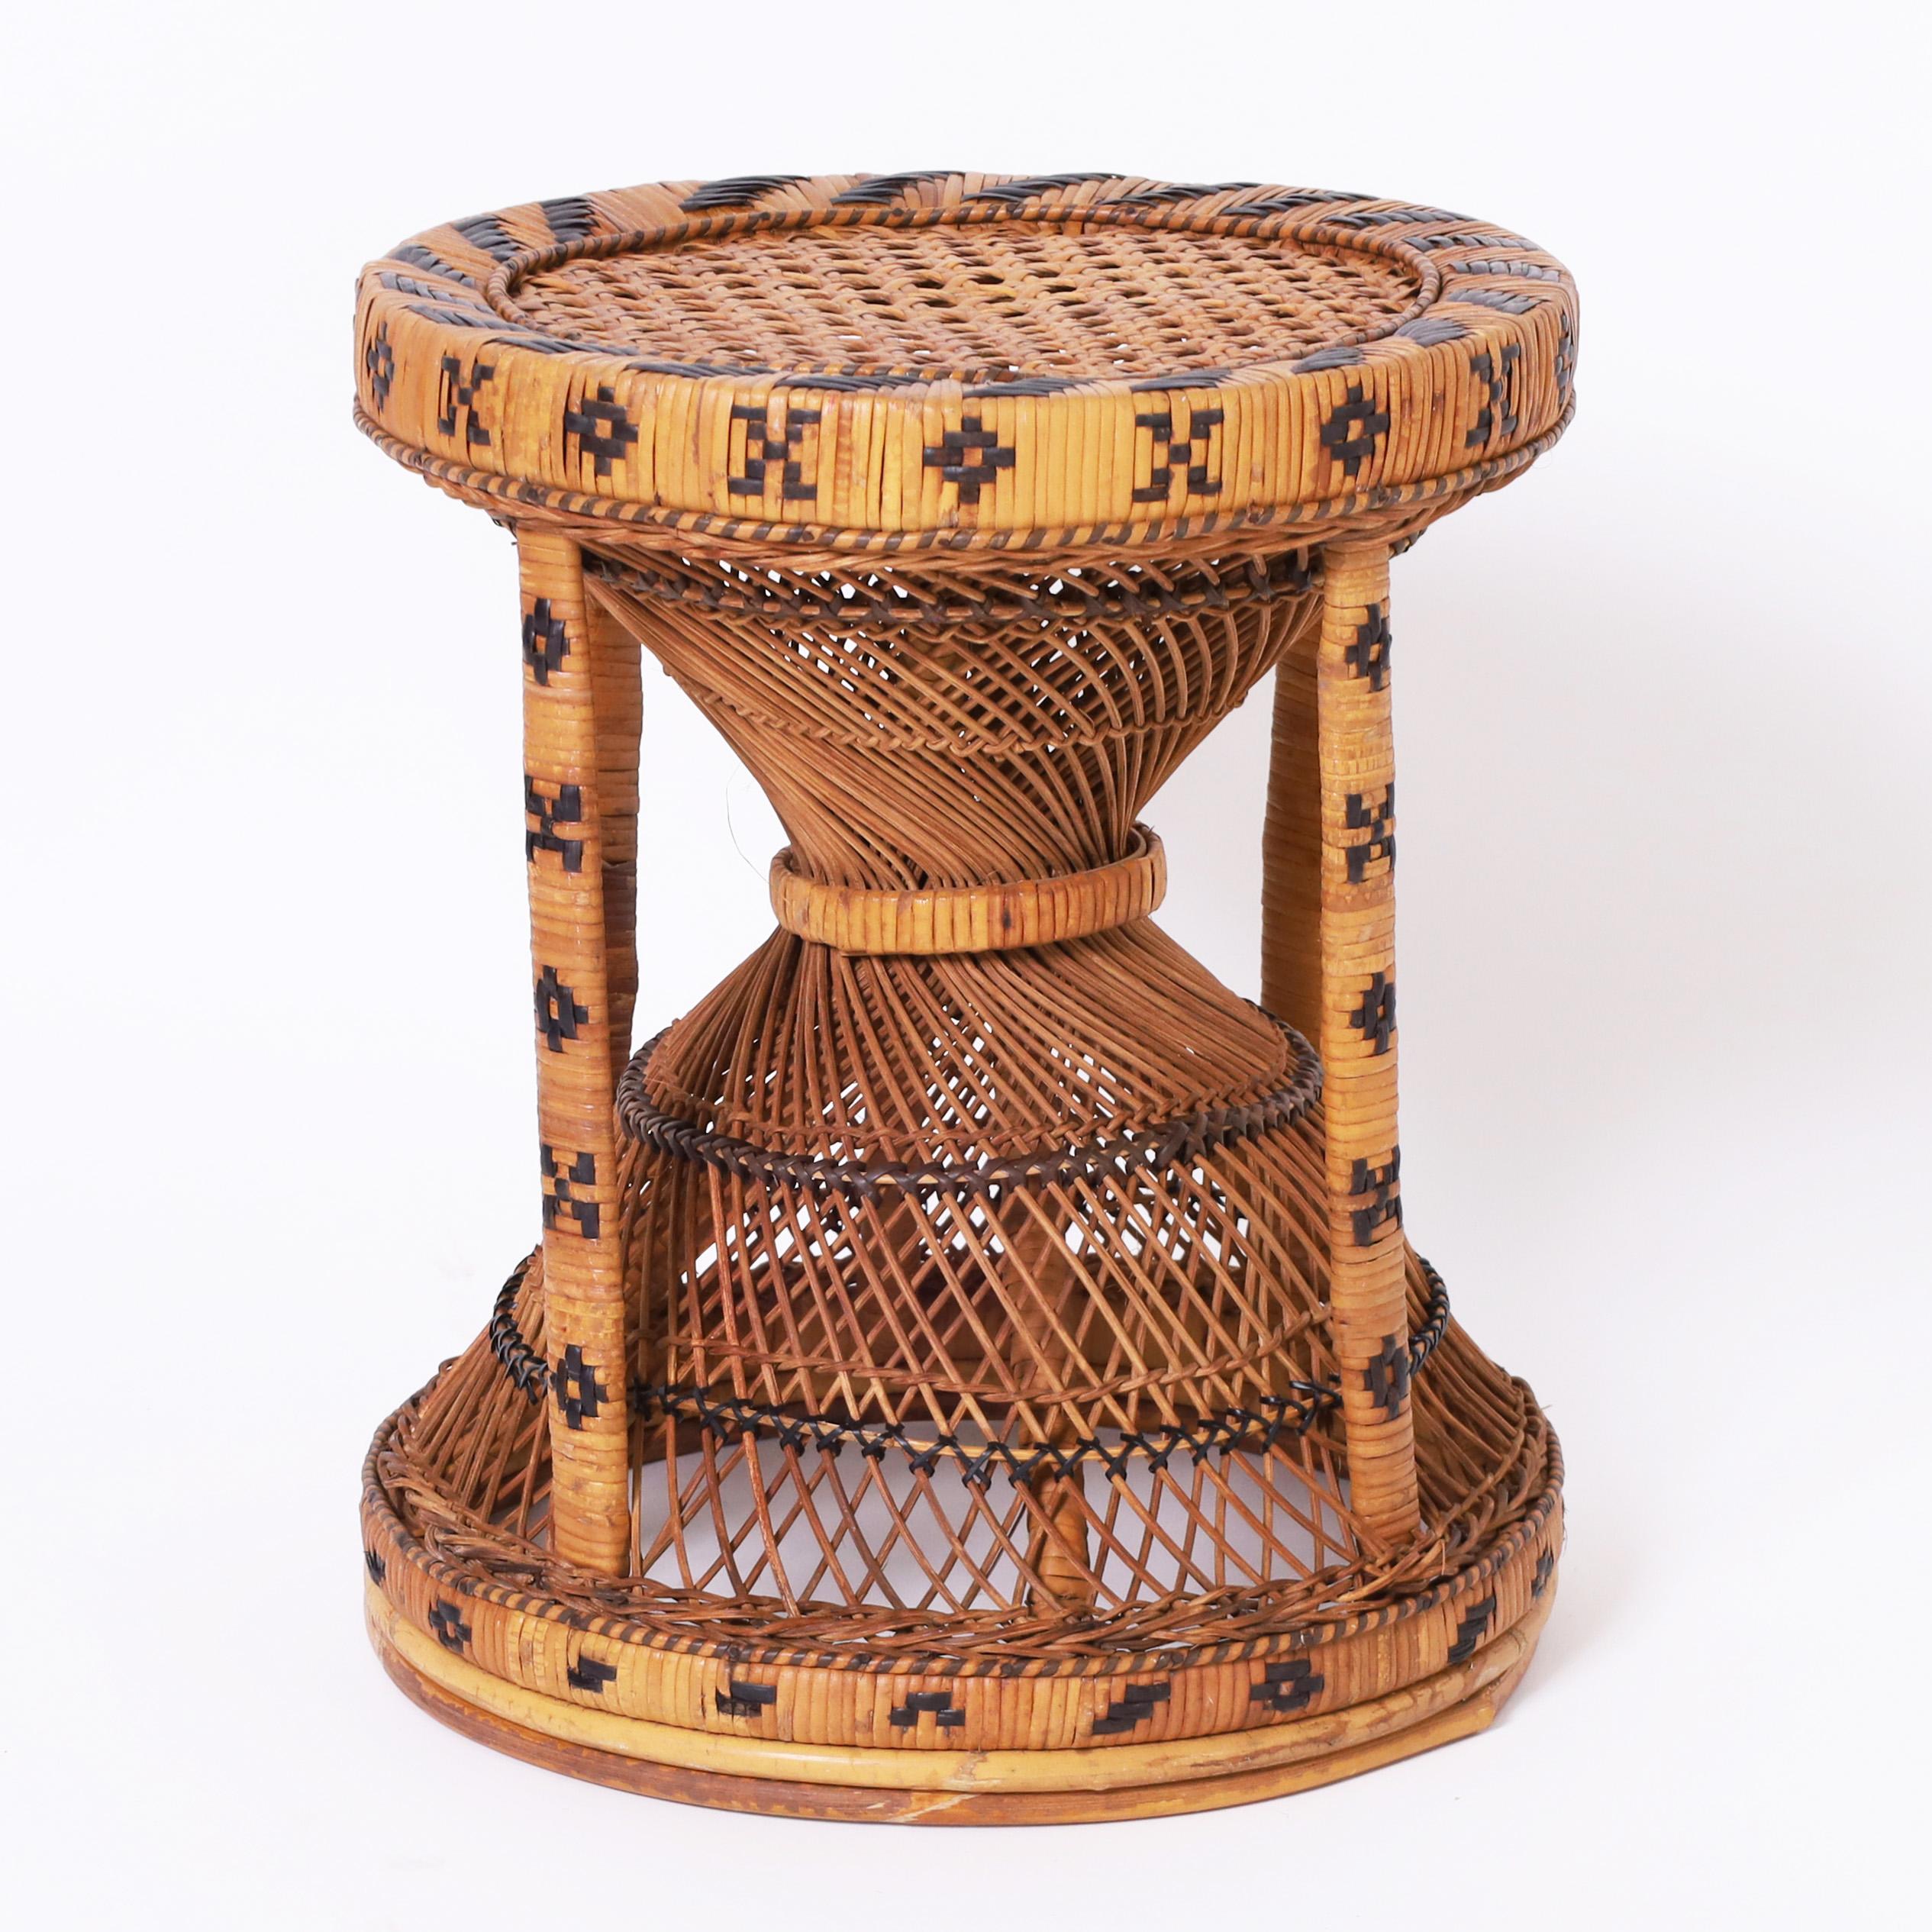 Hand-Woven Anglo Indian Pair of Wicker Stools or Stands